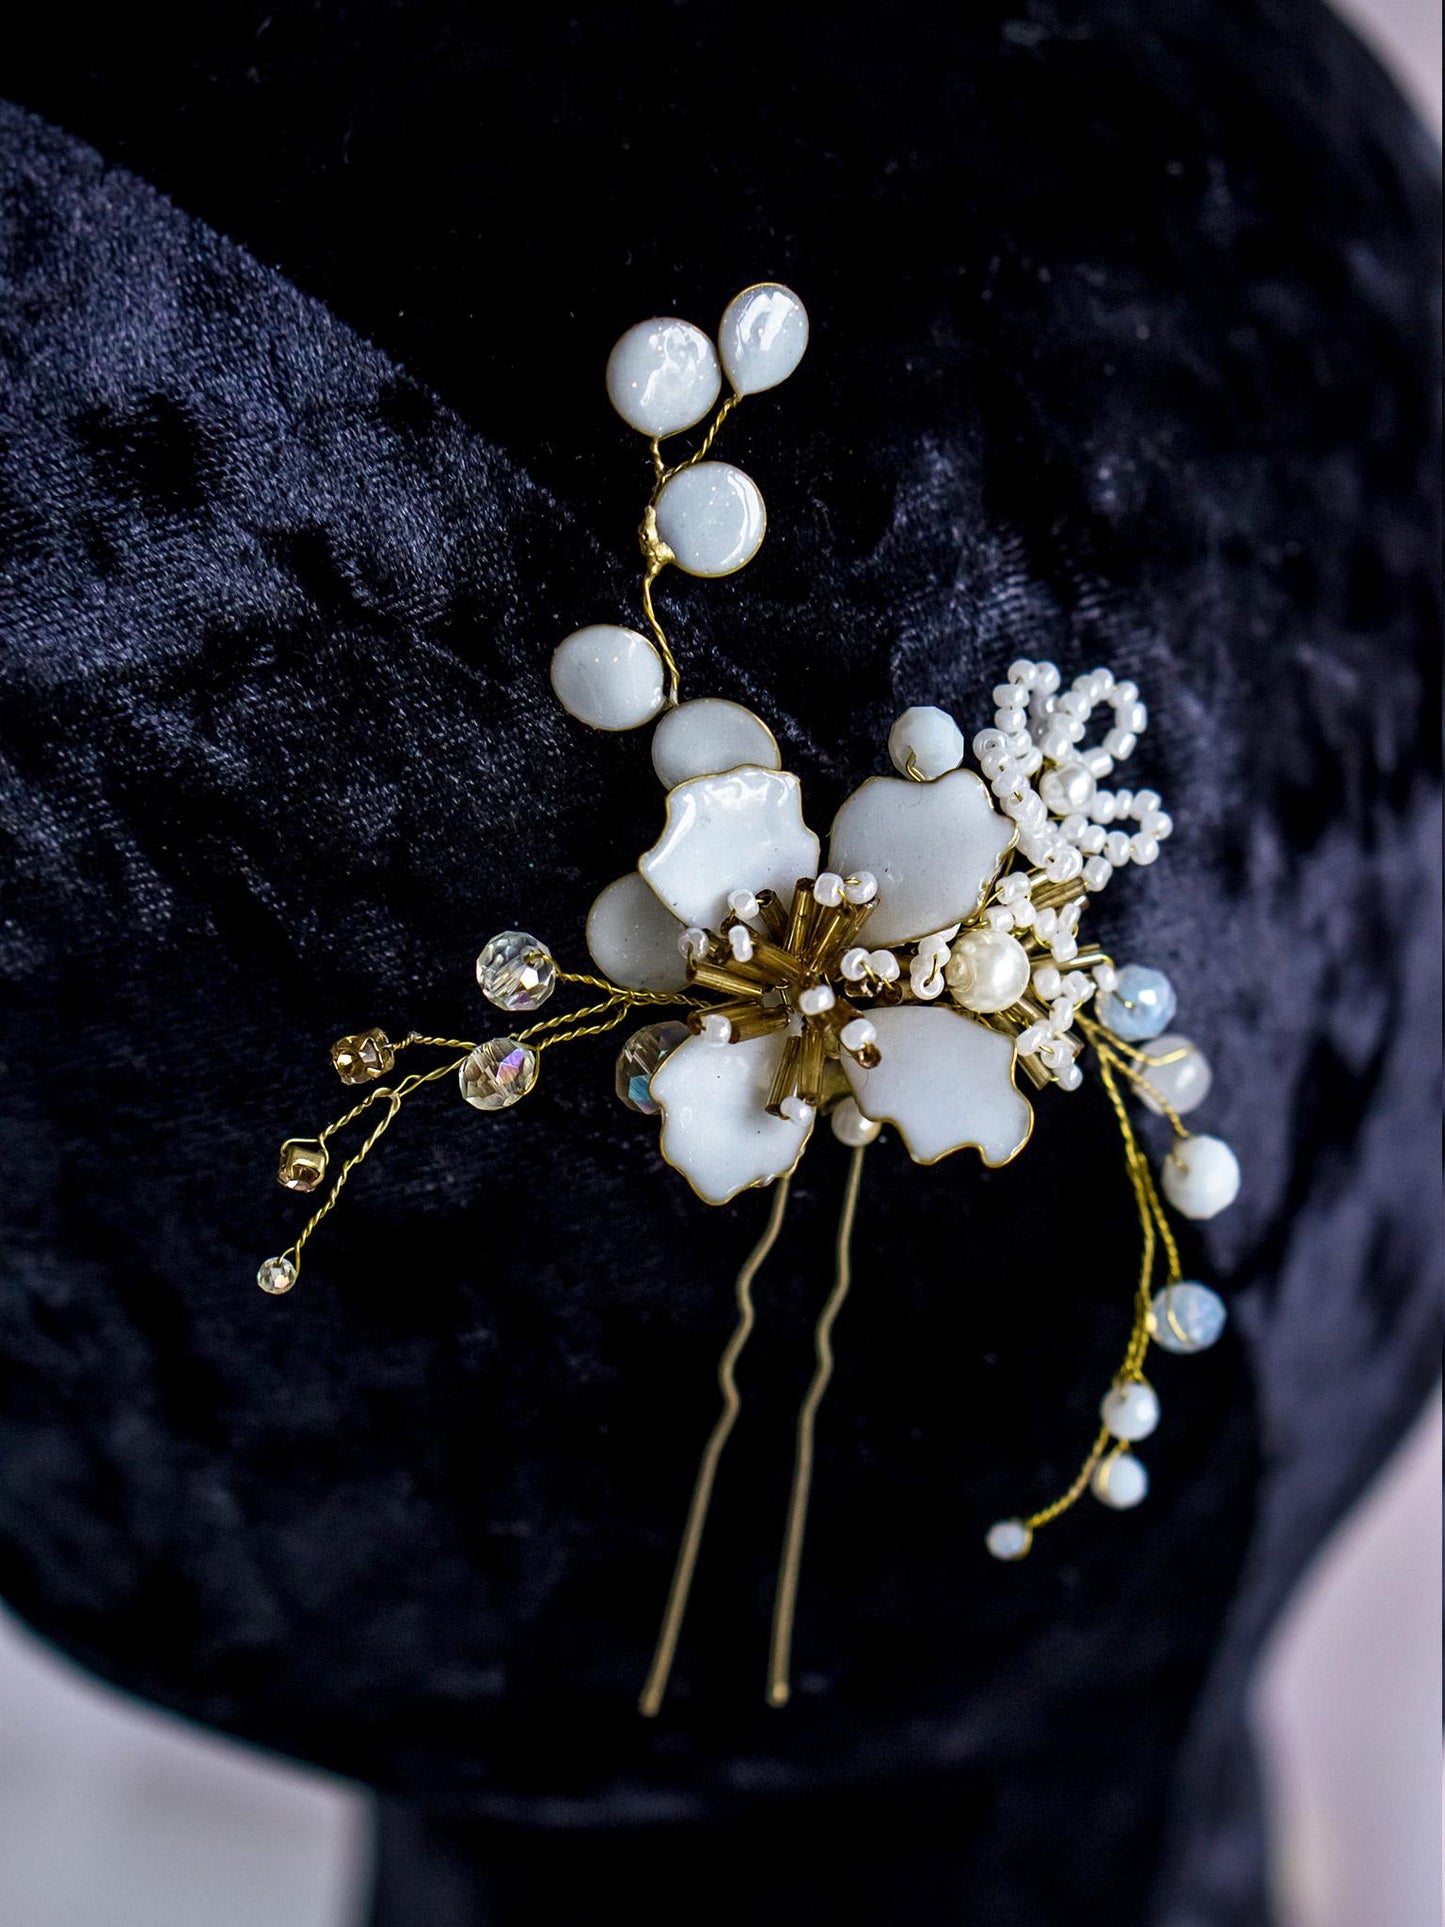 White floral hair pin with gold fittings and pearl details